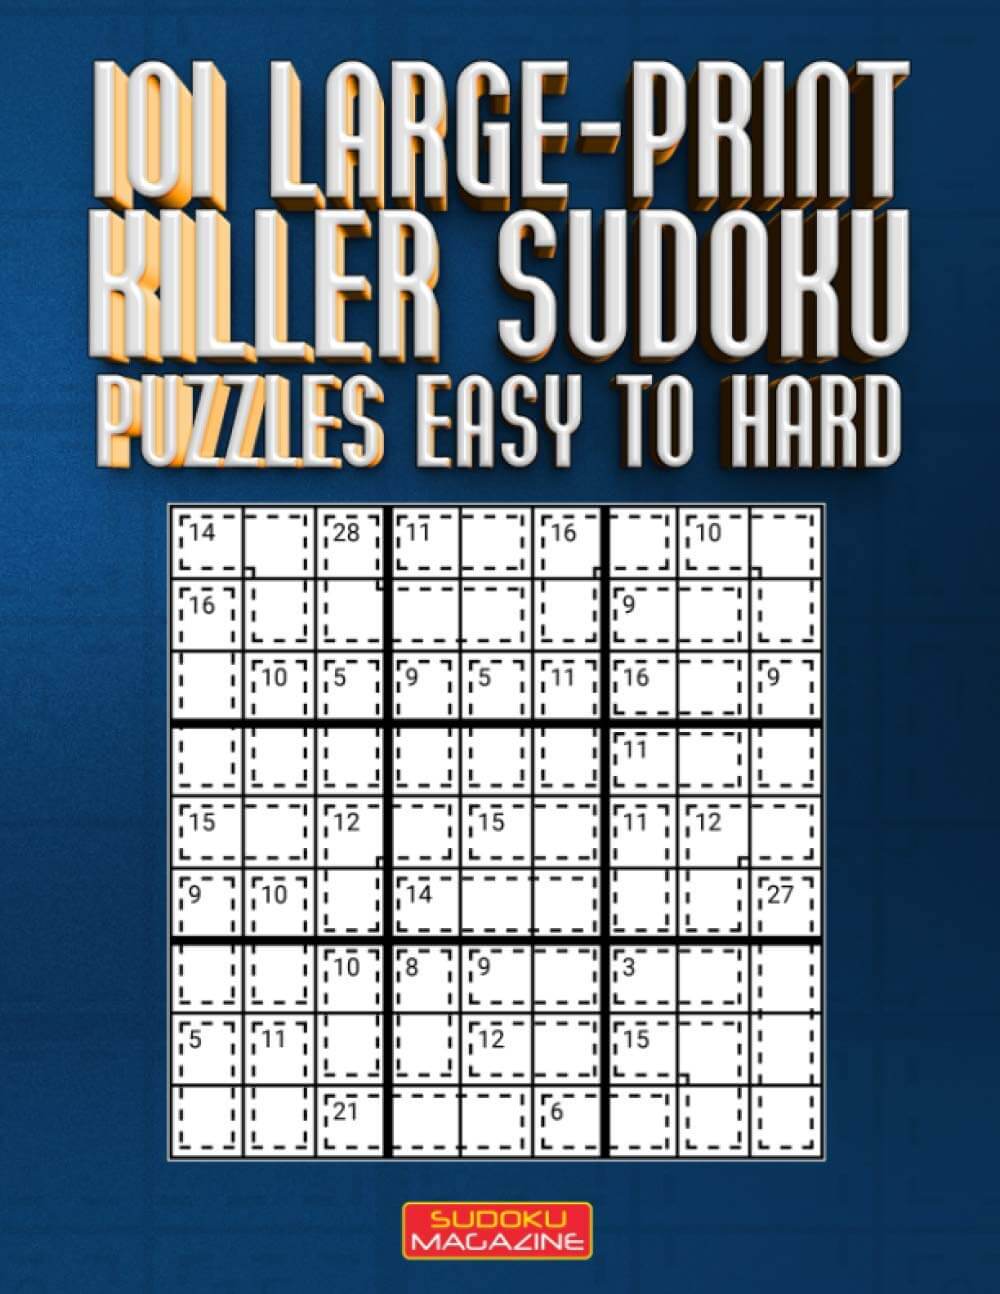 101 Large-Print Killer Sudoku Puzzles Easy to Hard: One puzzle per page